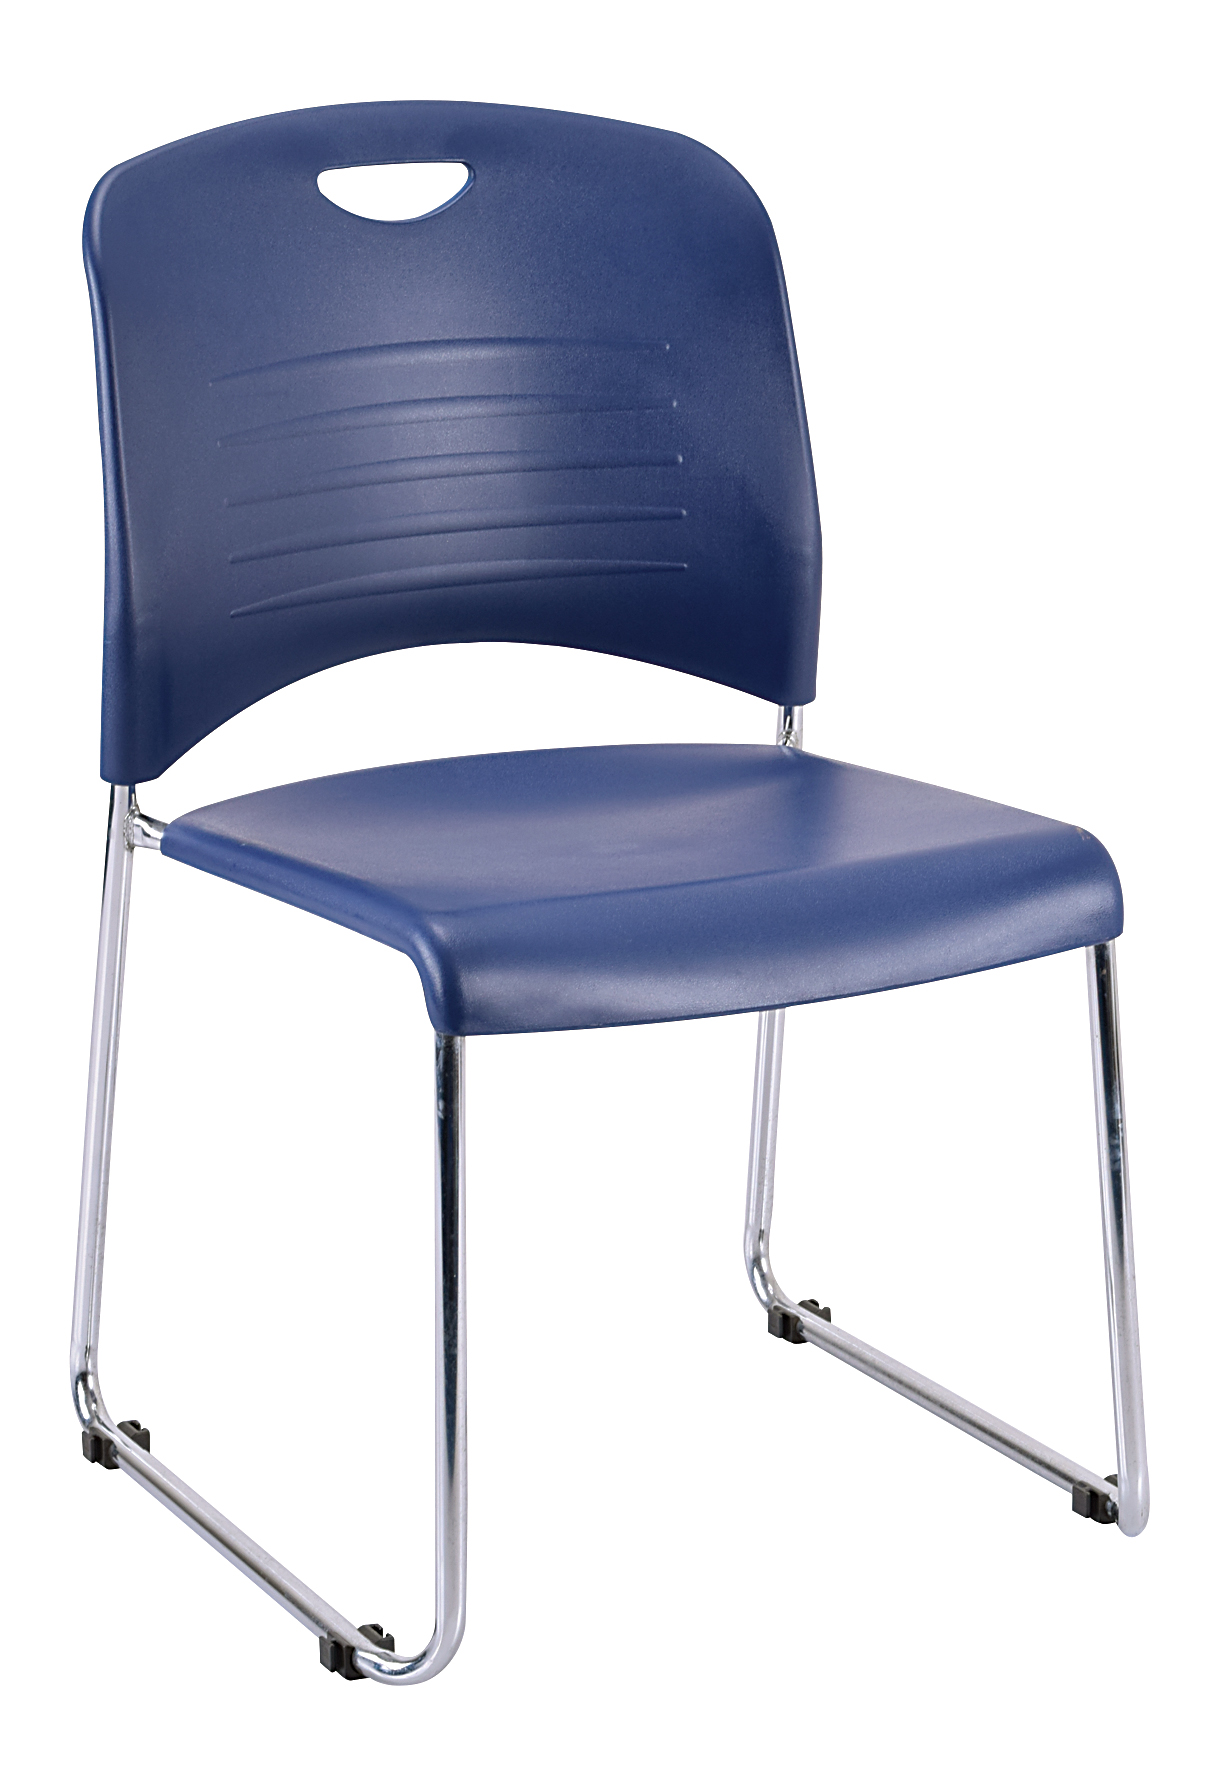 Set of Four Navy Blue and Silver Plastic Office Chair-372440-1